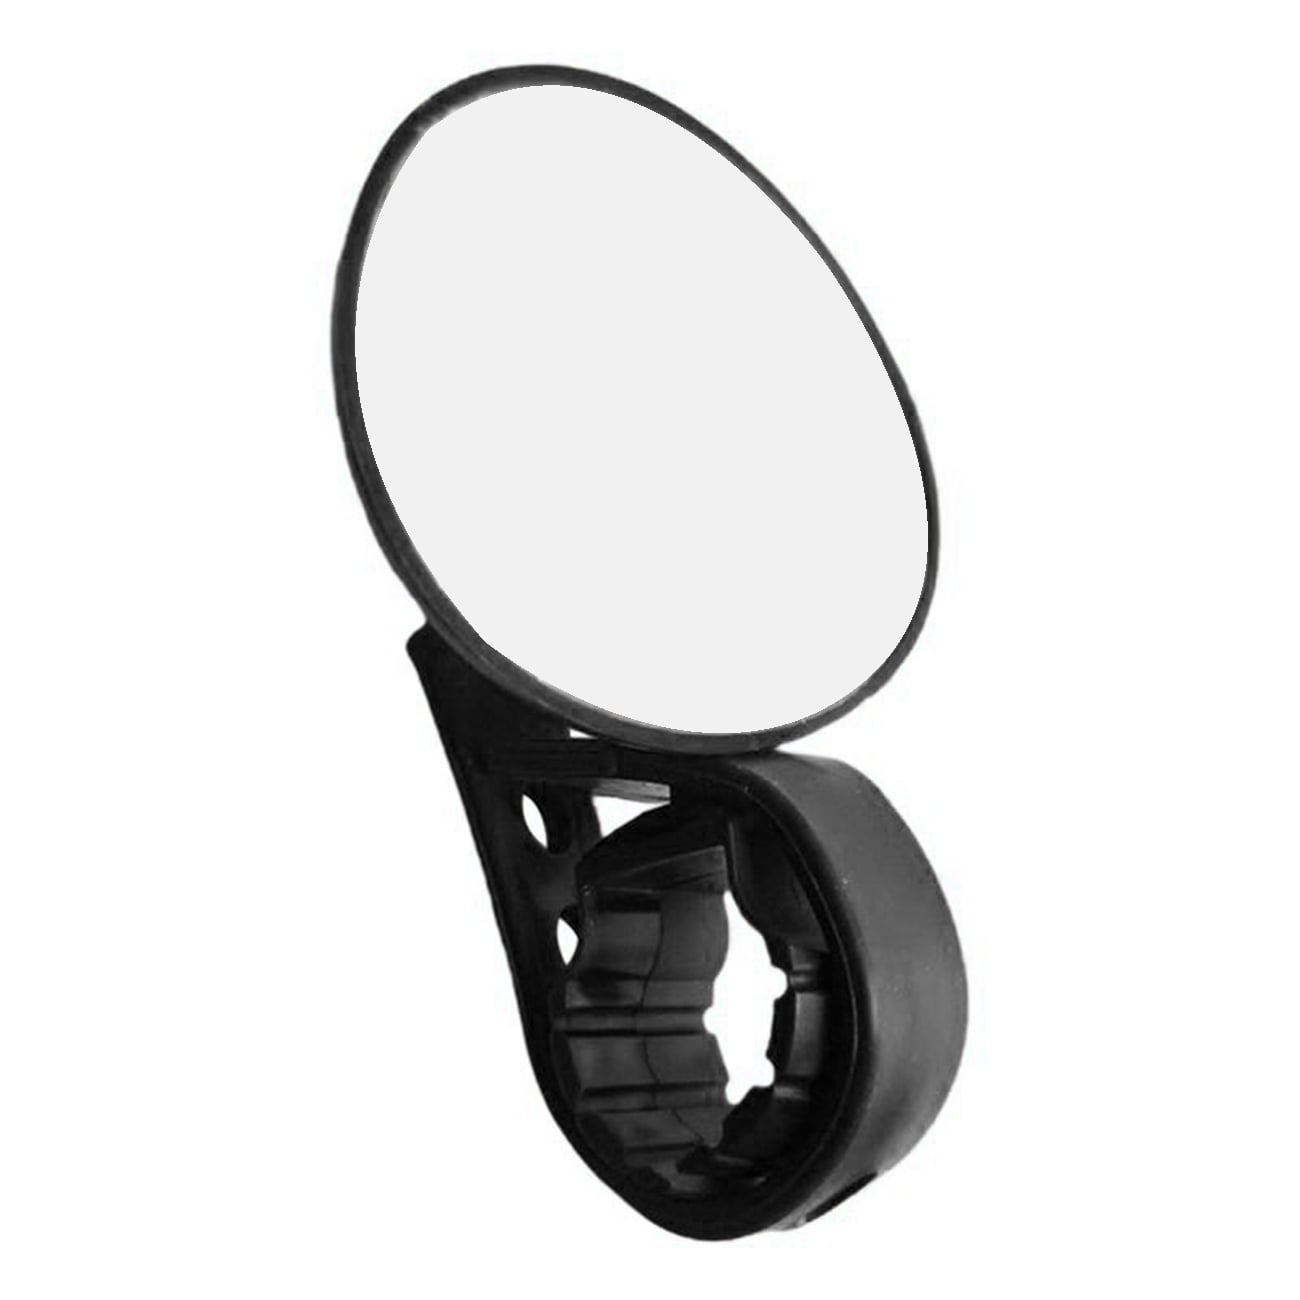 Details about   360° Rotate Cycling Bicycle Rear View Mirror Handlebar Flexible Safety Rearview 